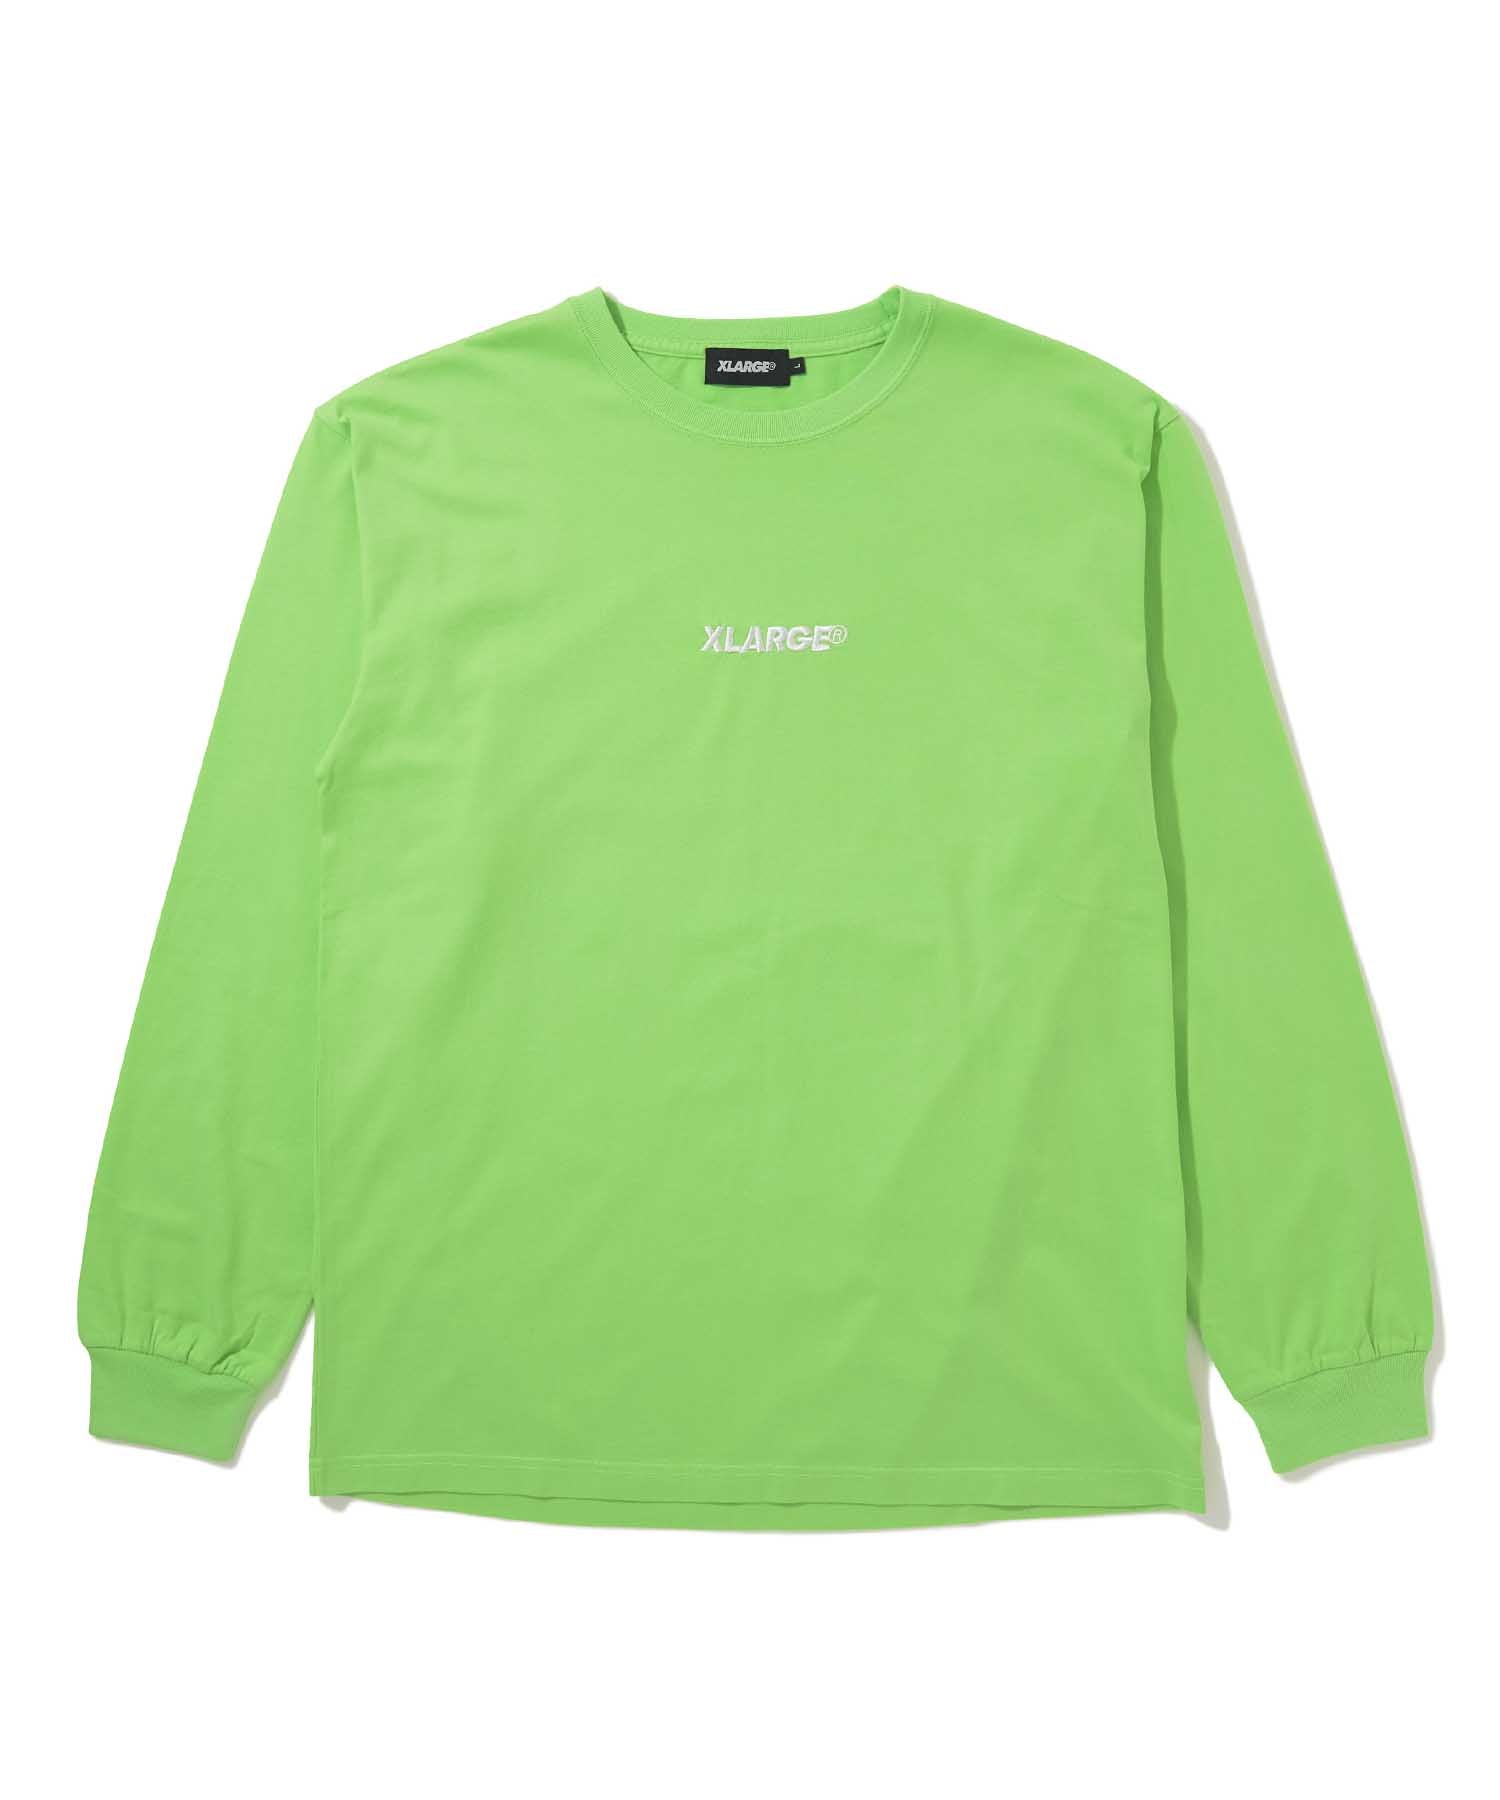 L/S TEE EMBROIDERY STANDARD LOGO T-SHIRT XLARGE  